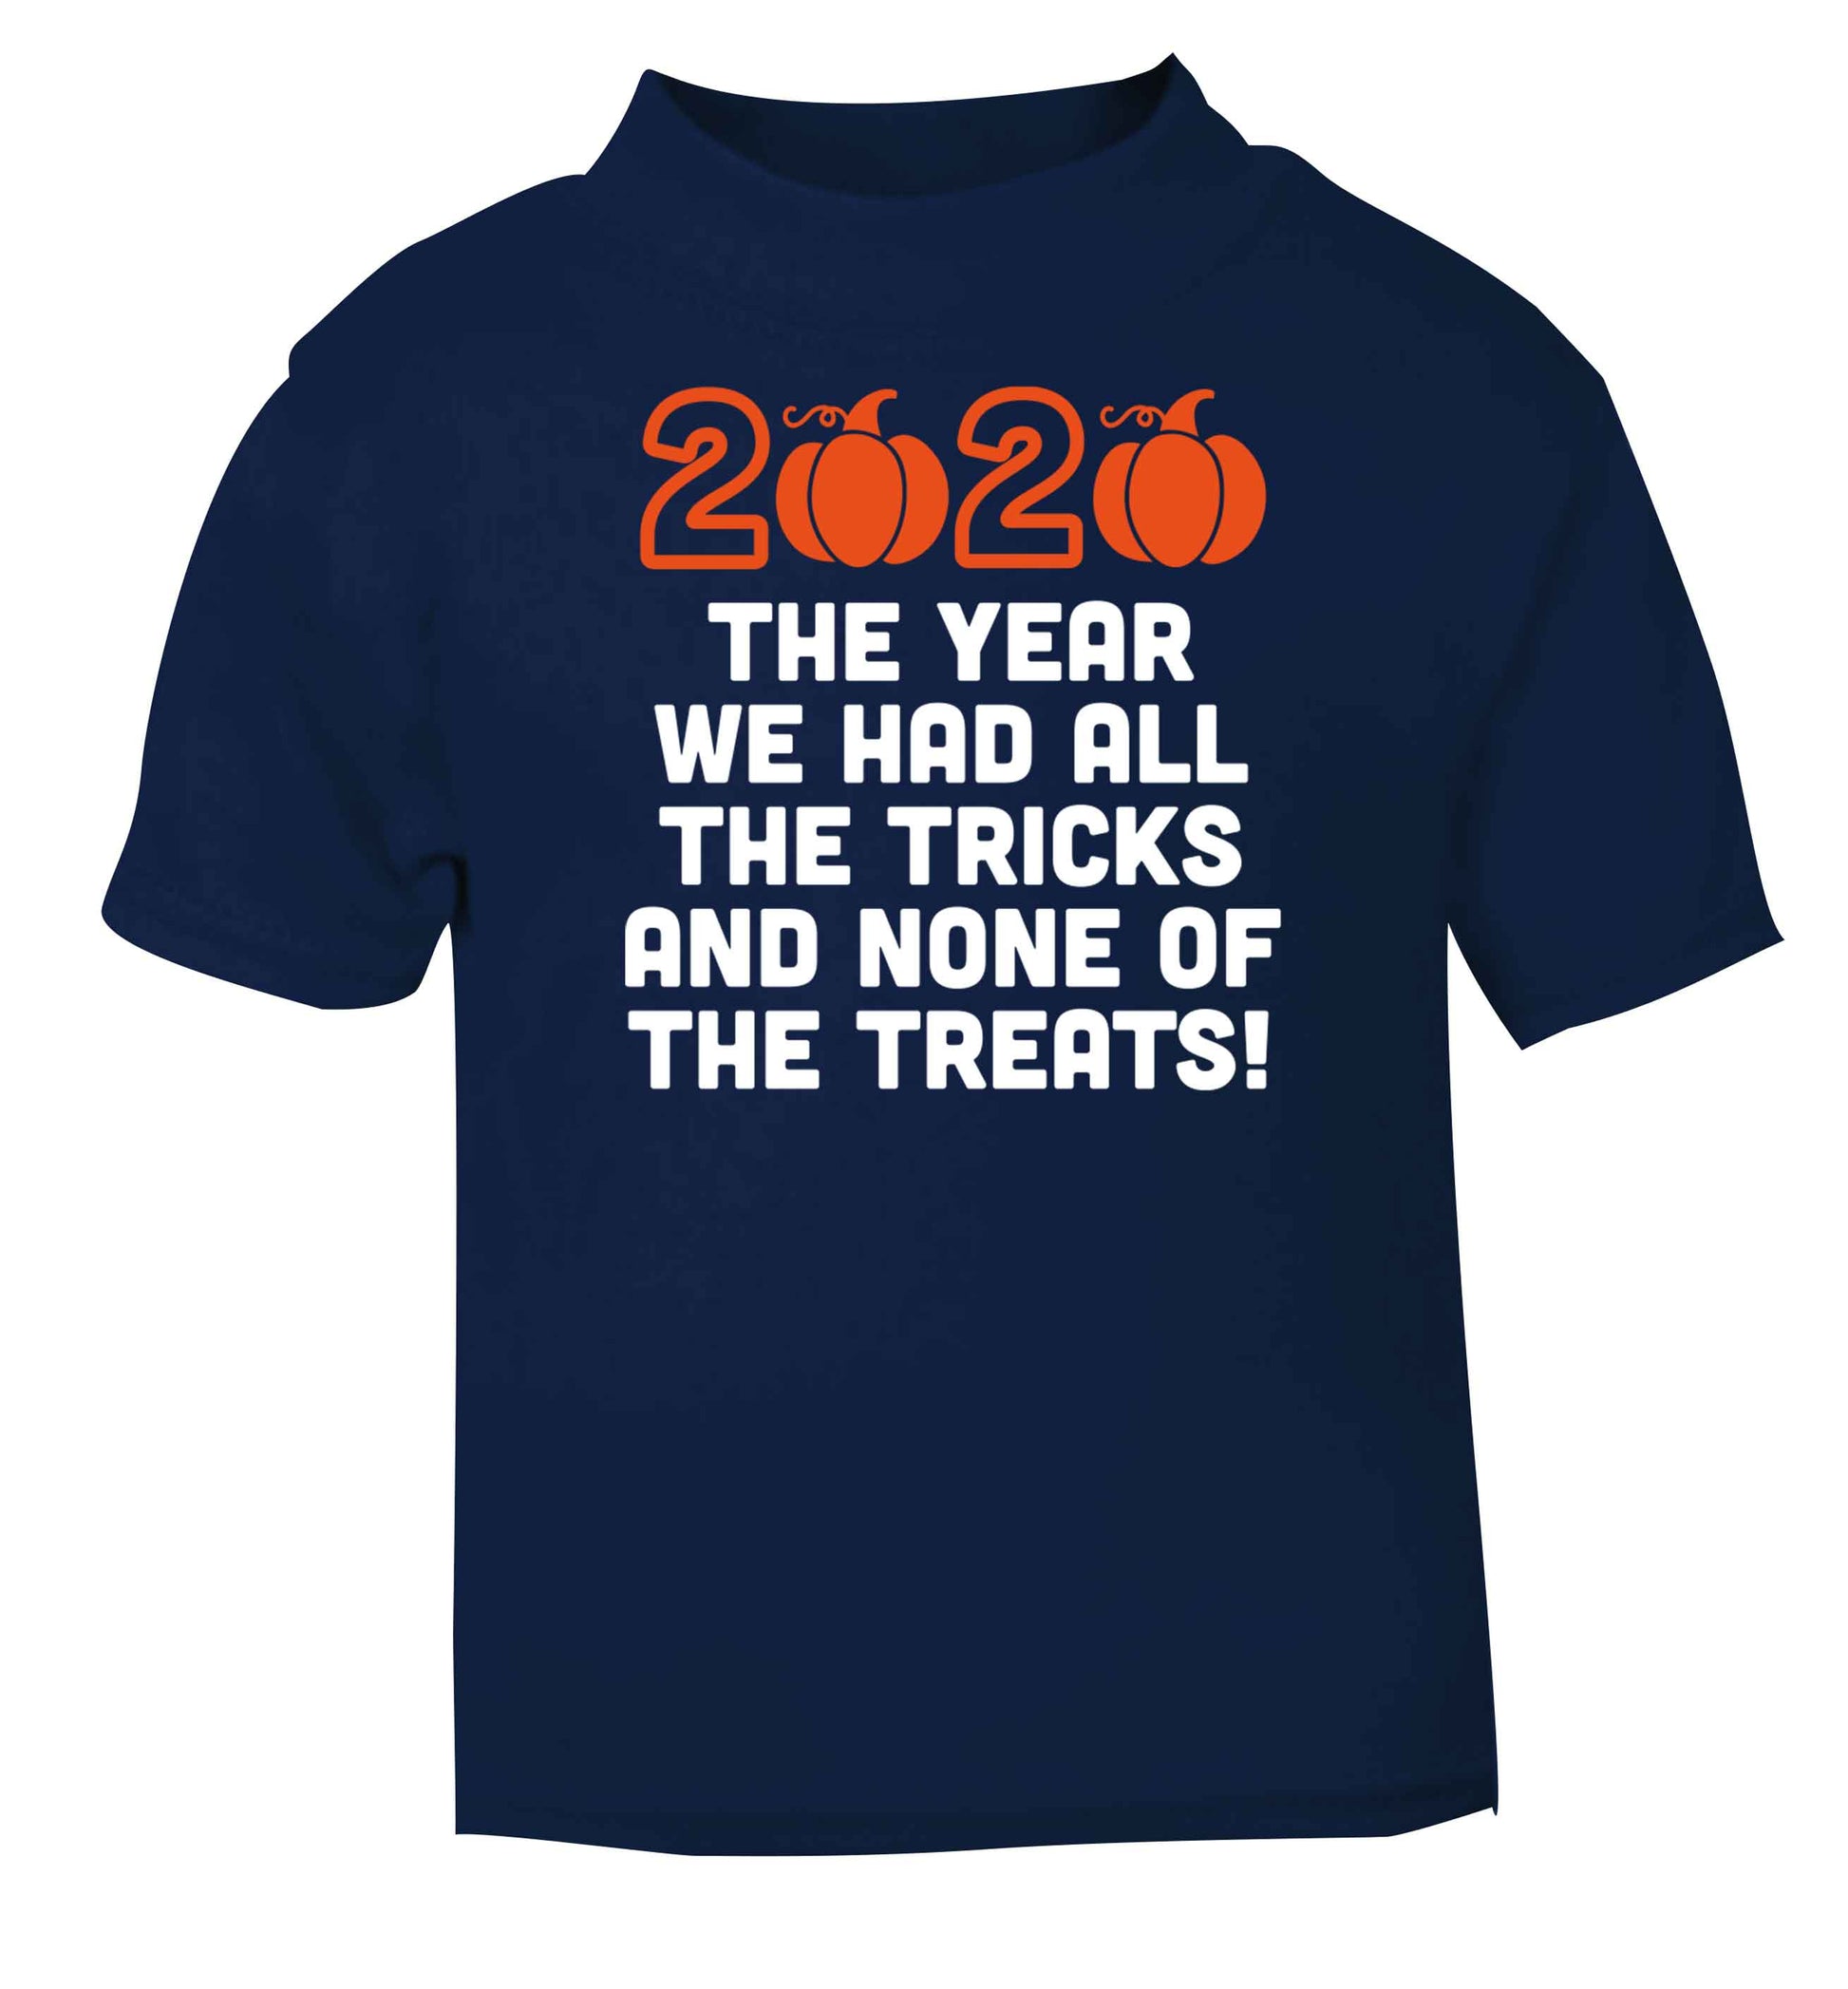 2020 The year we had all of the tricks and none of the treats navy baby toddler Tshirt 2 Years